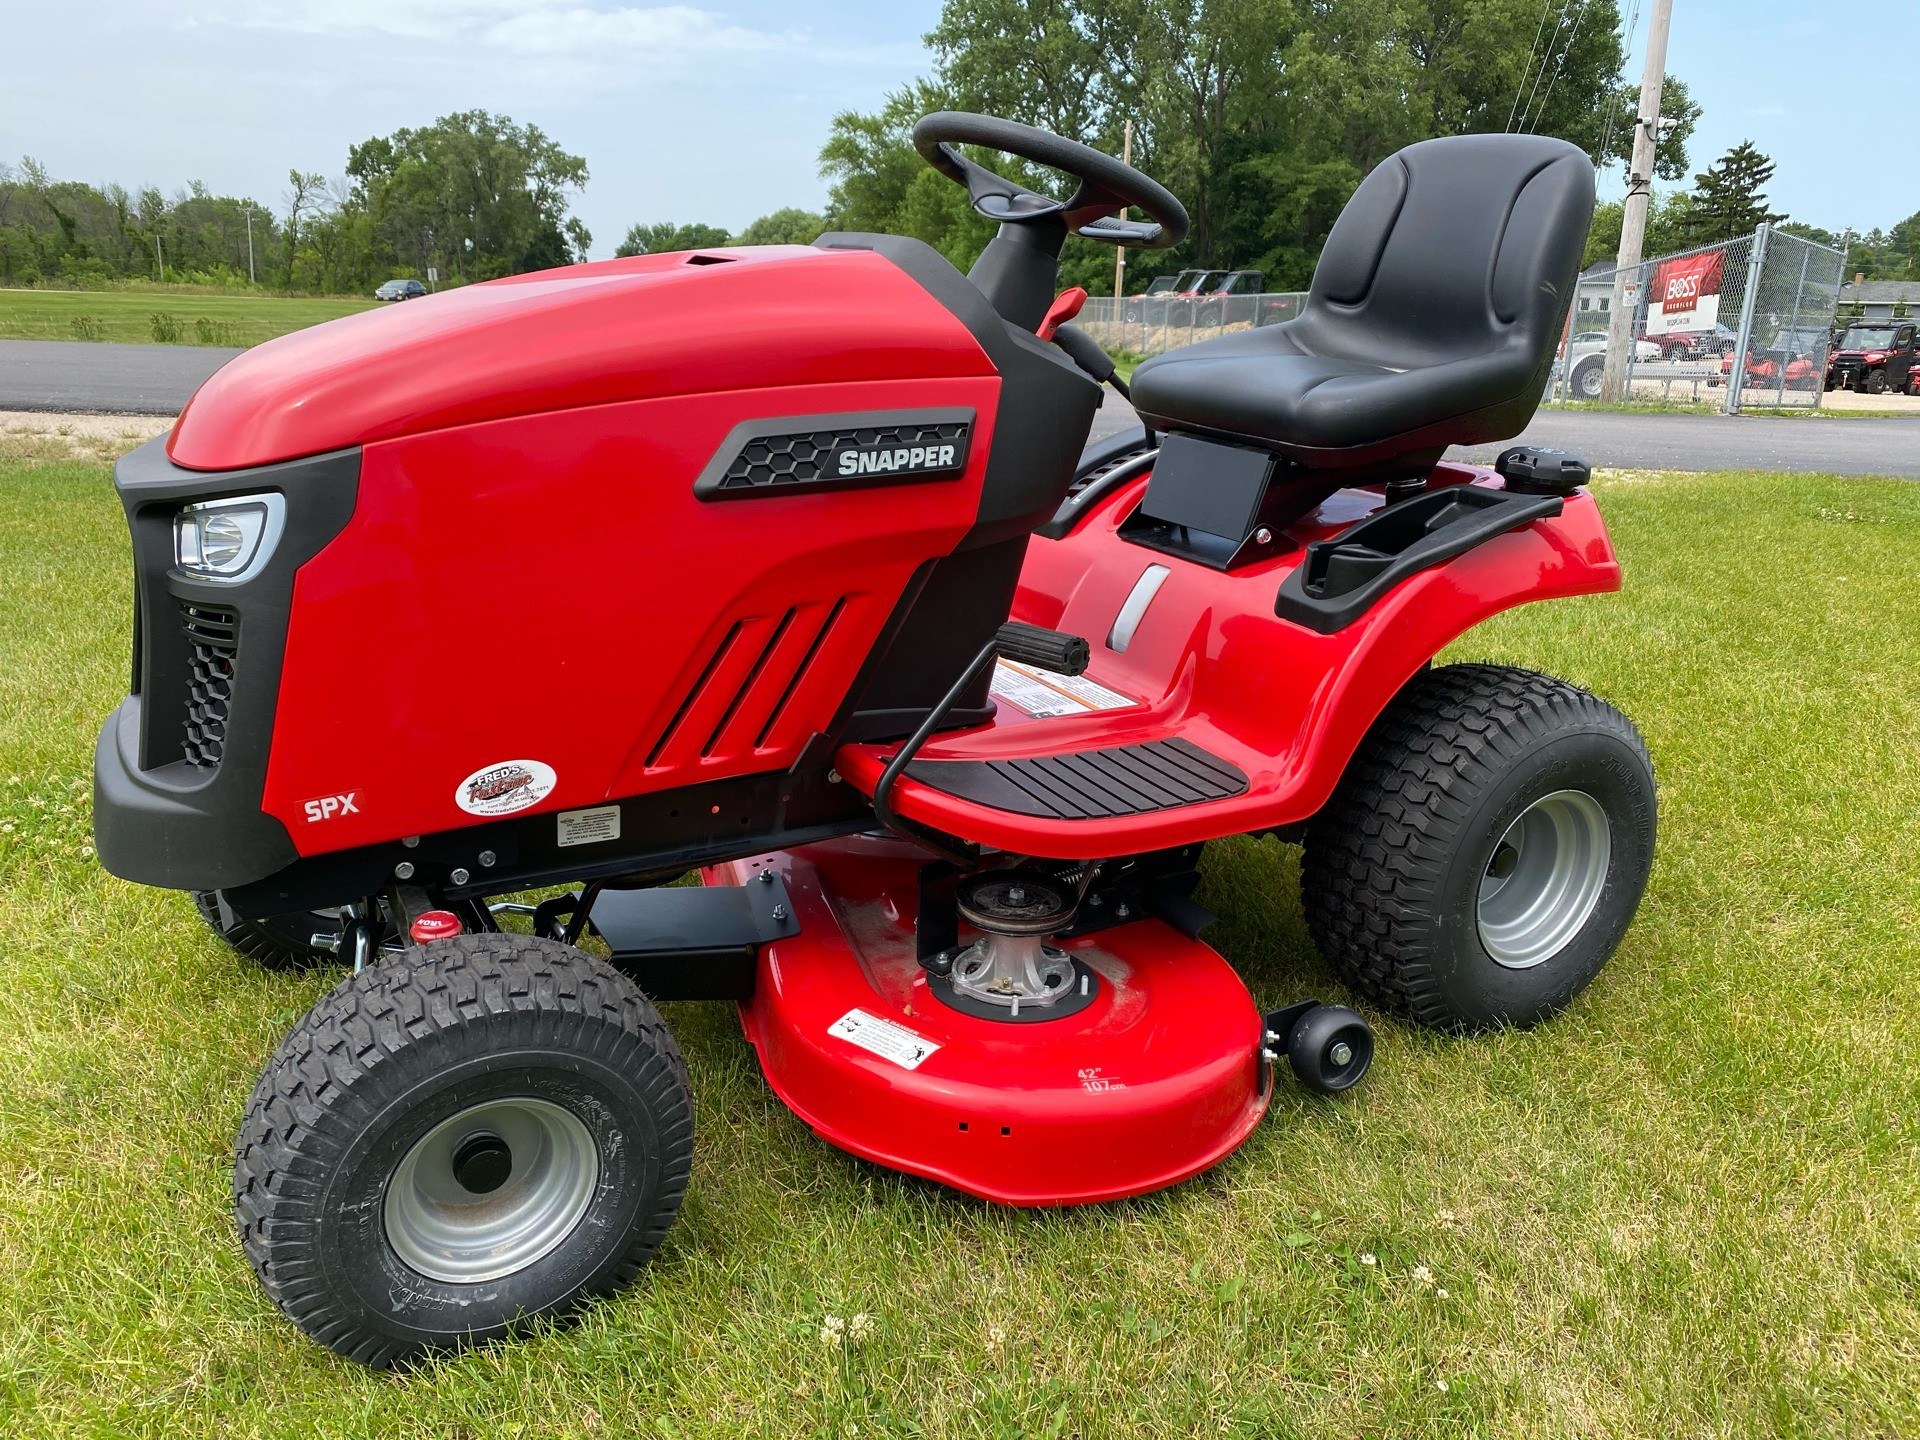 New Snapper Spx Lawn Mowers In Fond Du Lac Wi Stock Number Sna655635